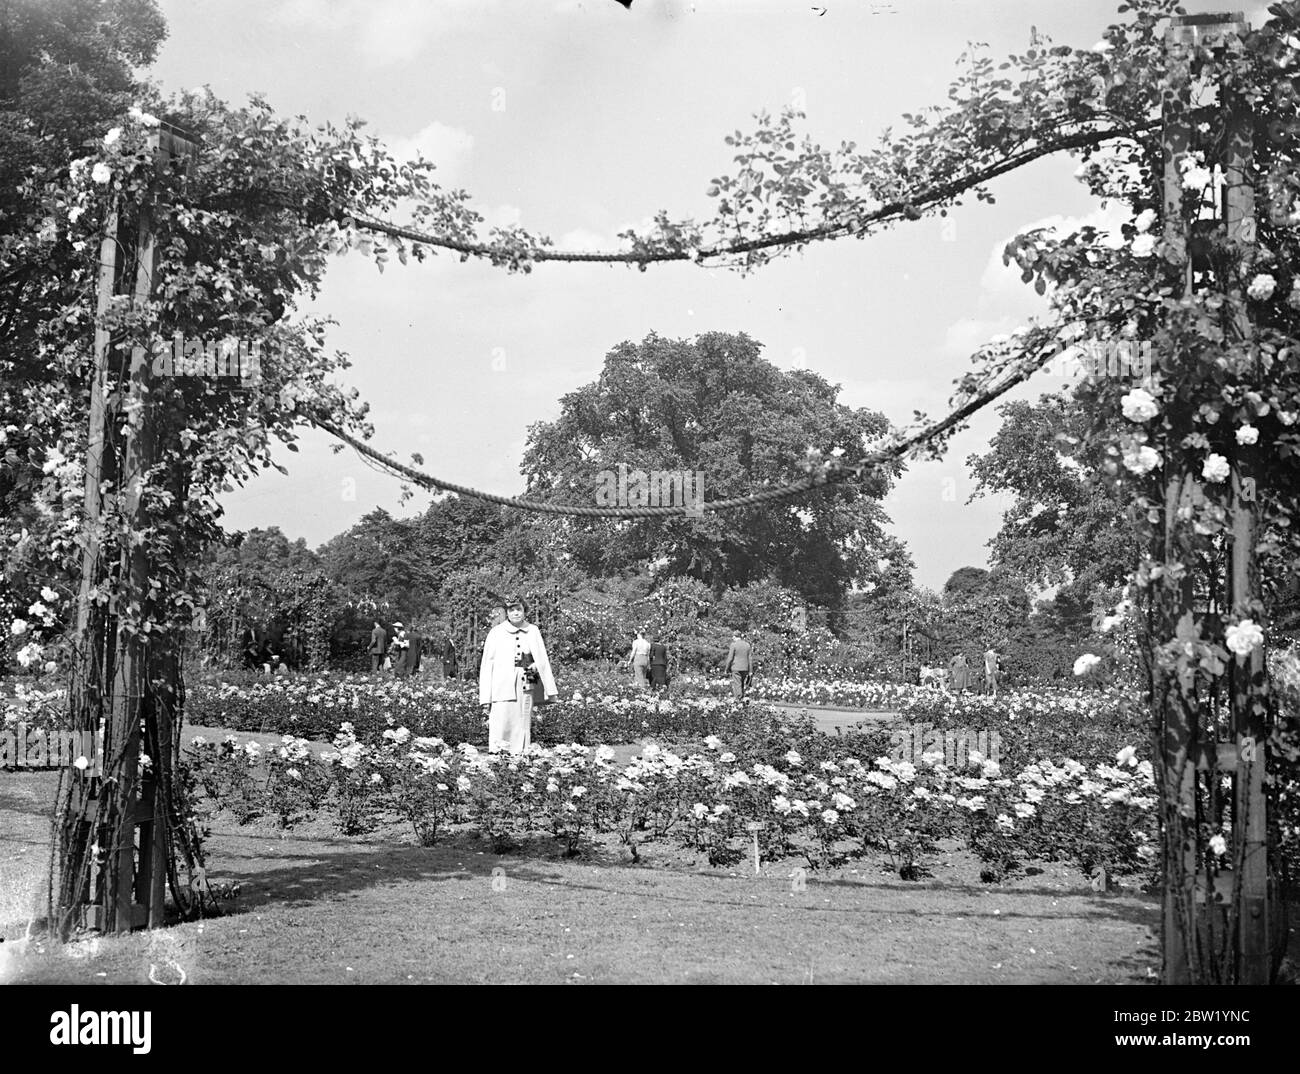 20,000 roses in the heart of London. A view of the lovely Queen Mary's Gardens in Regent's park, London, where 20,000 rose trees are now in full bloom. 23 June 1937 Stock Photo